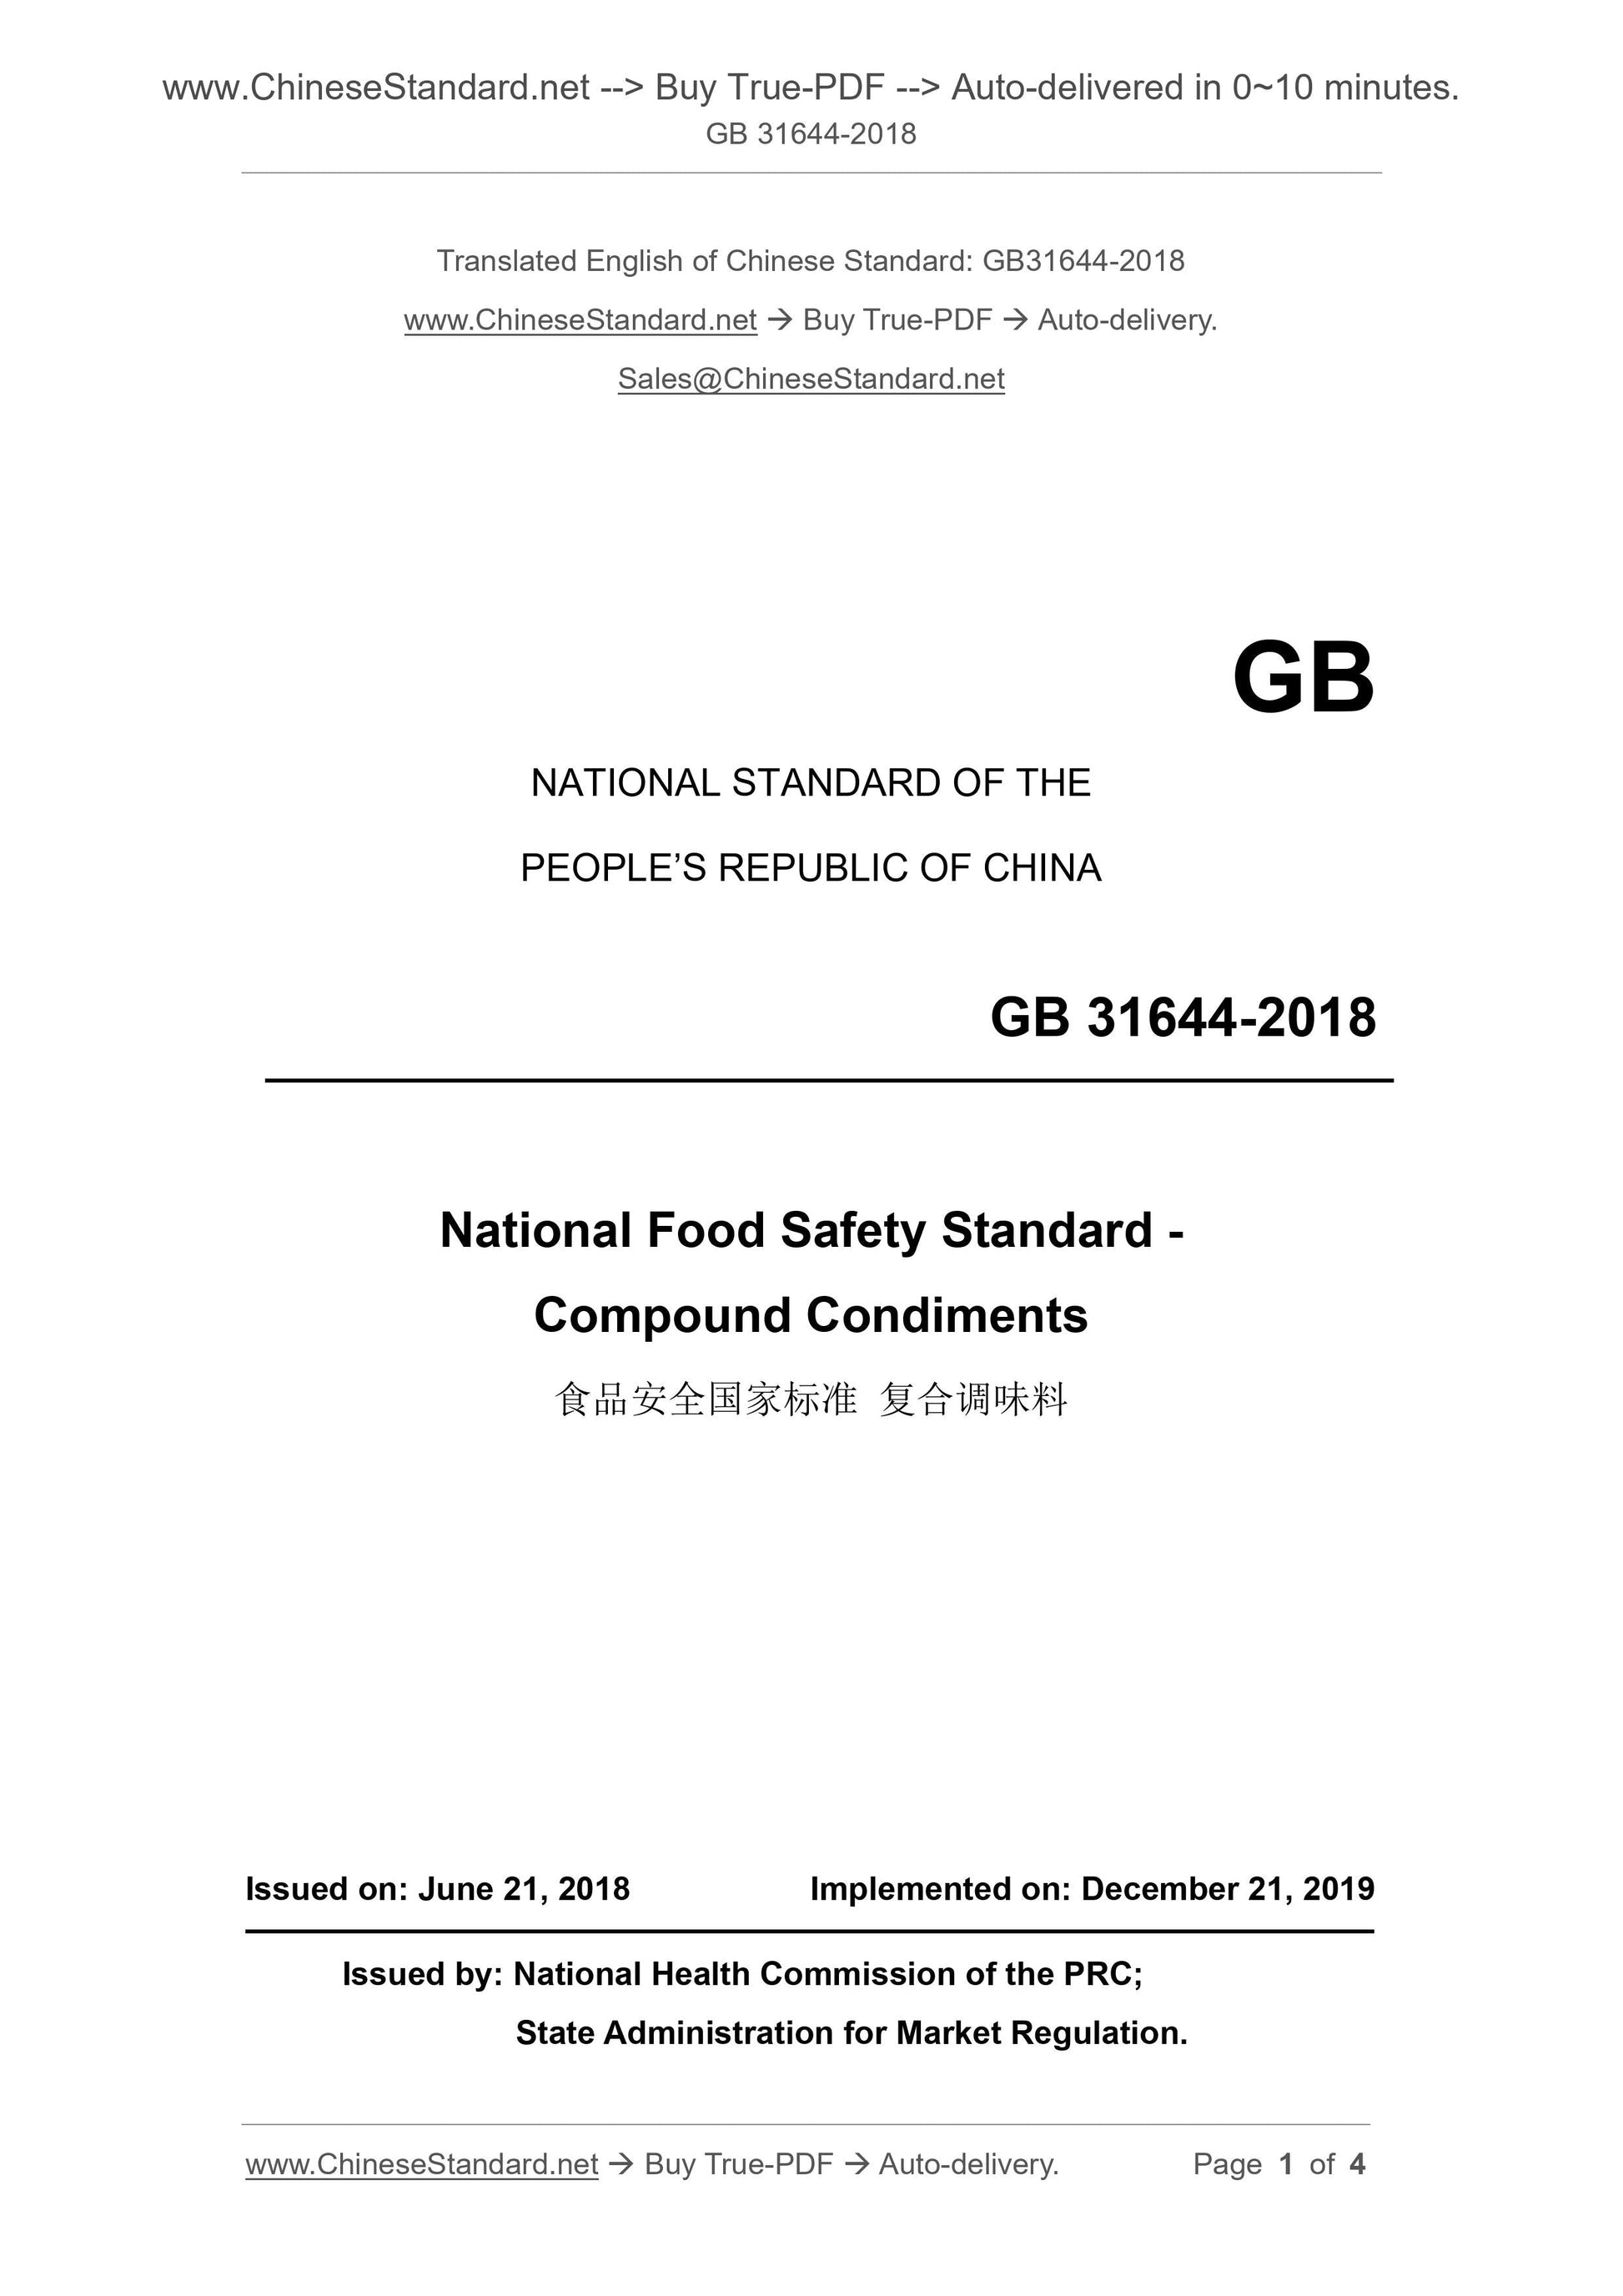 GB 31644-2018 Page 1